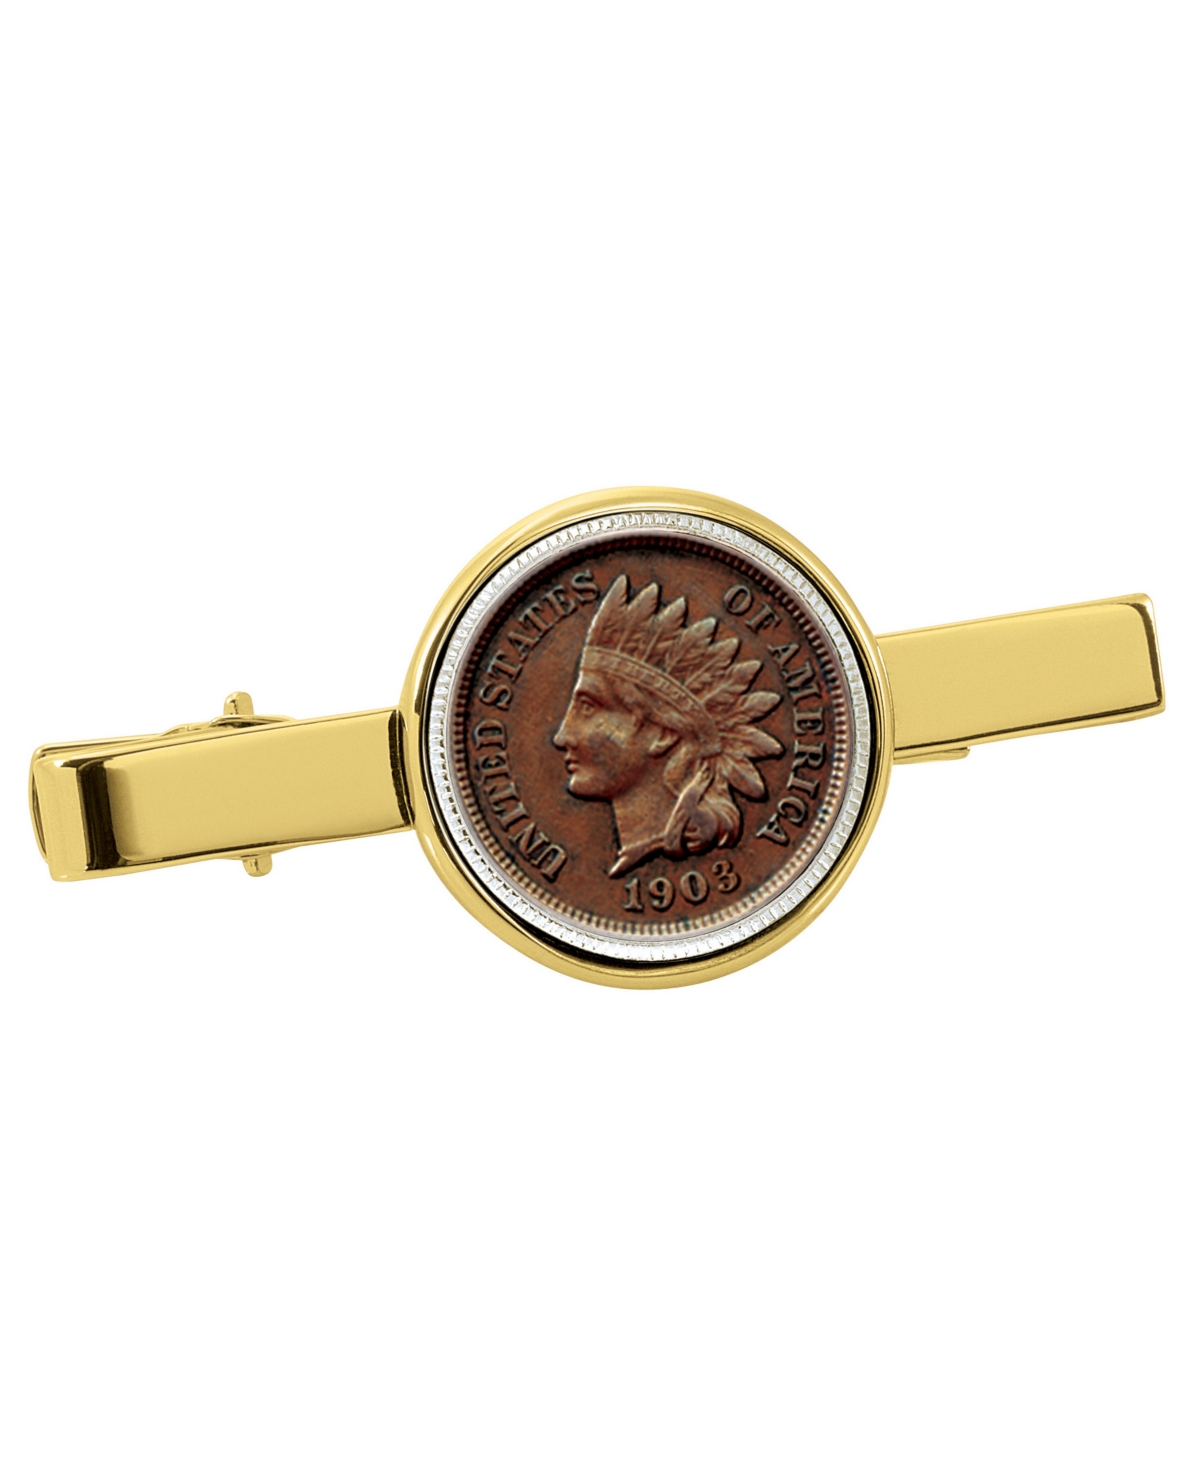 Indian Penny Coin Tie Clip - Gold